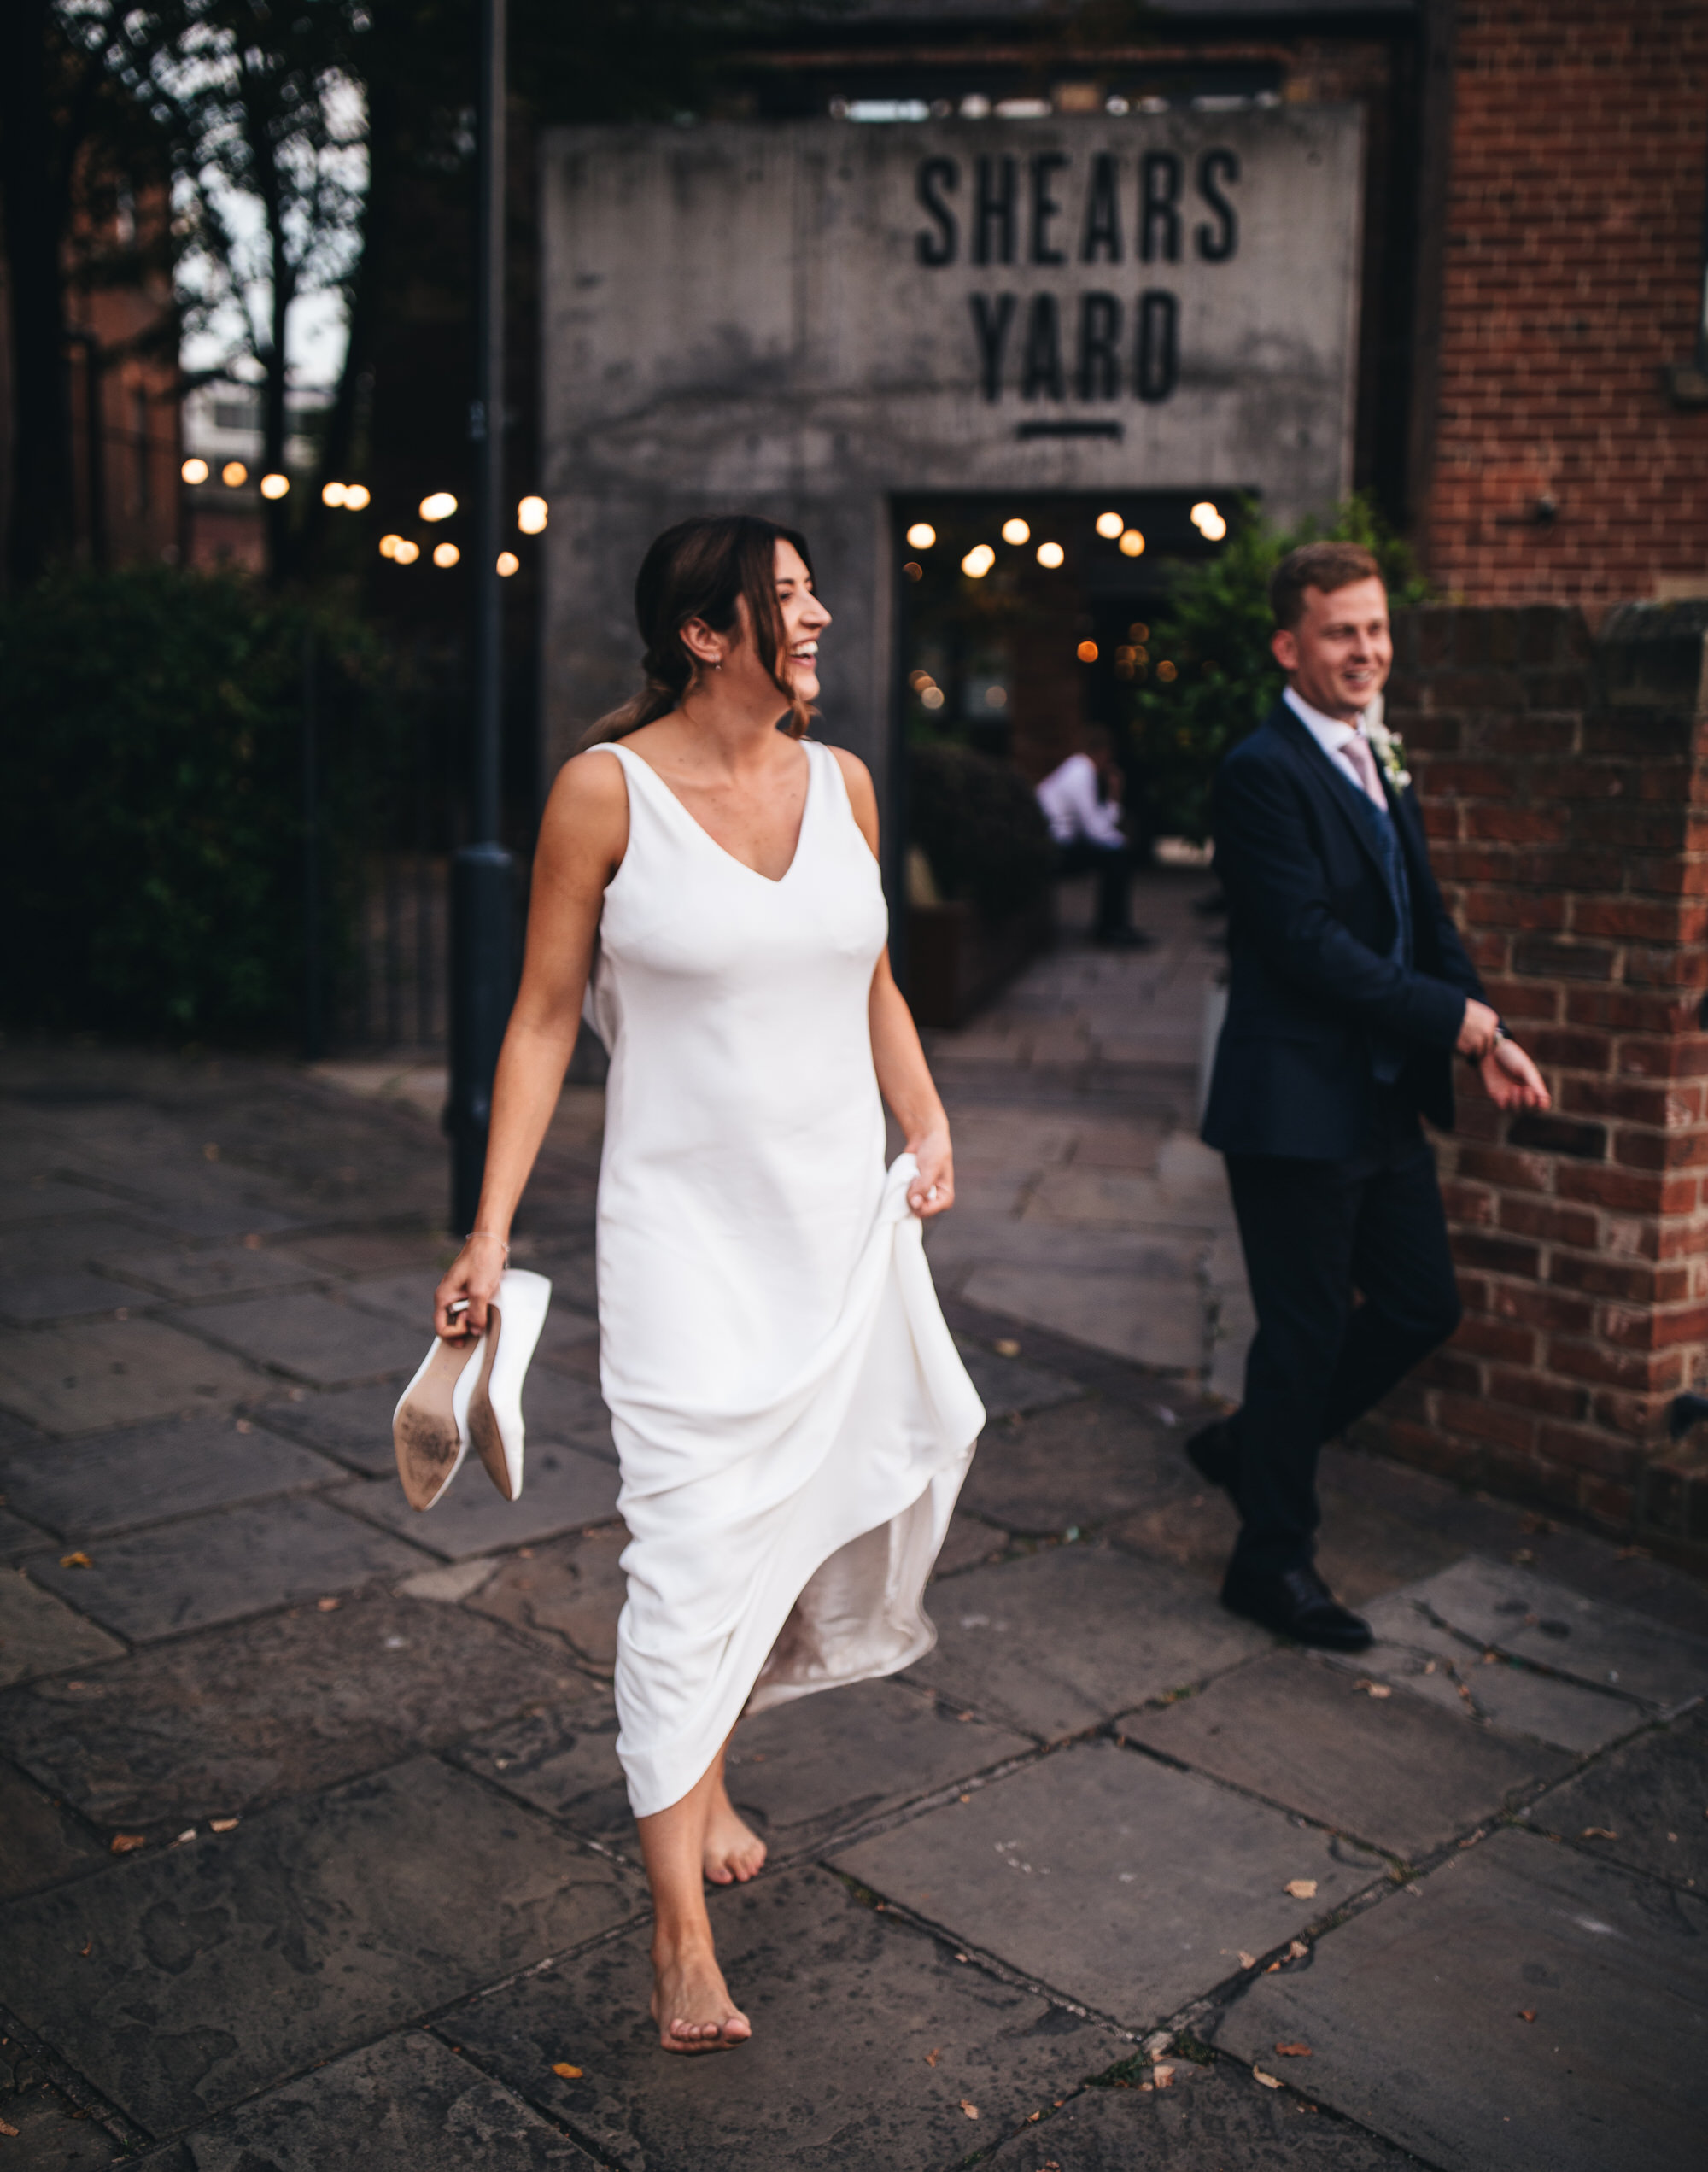 bride walks barefoot, holding wedding shoes with groom outside venue